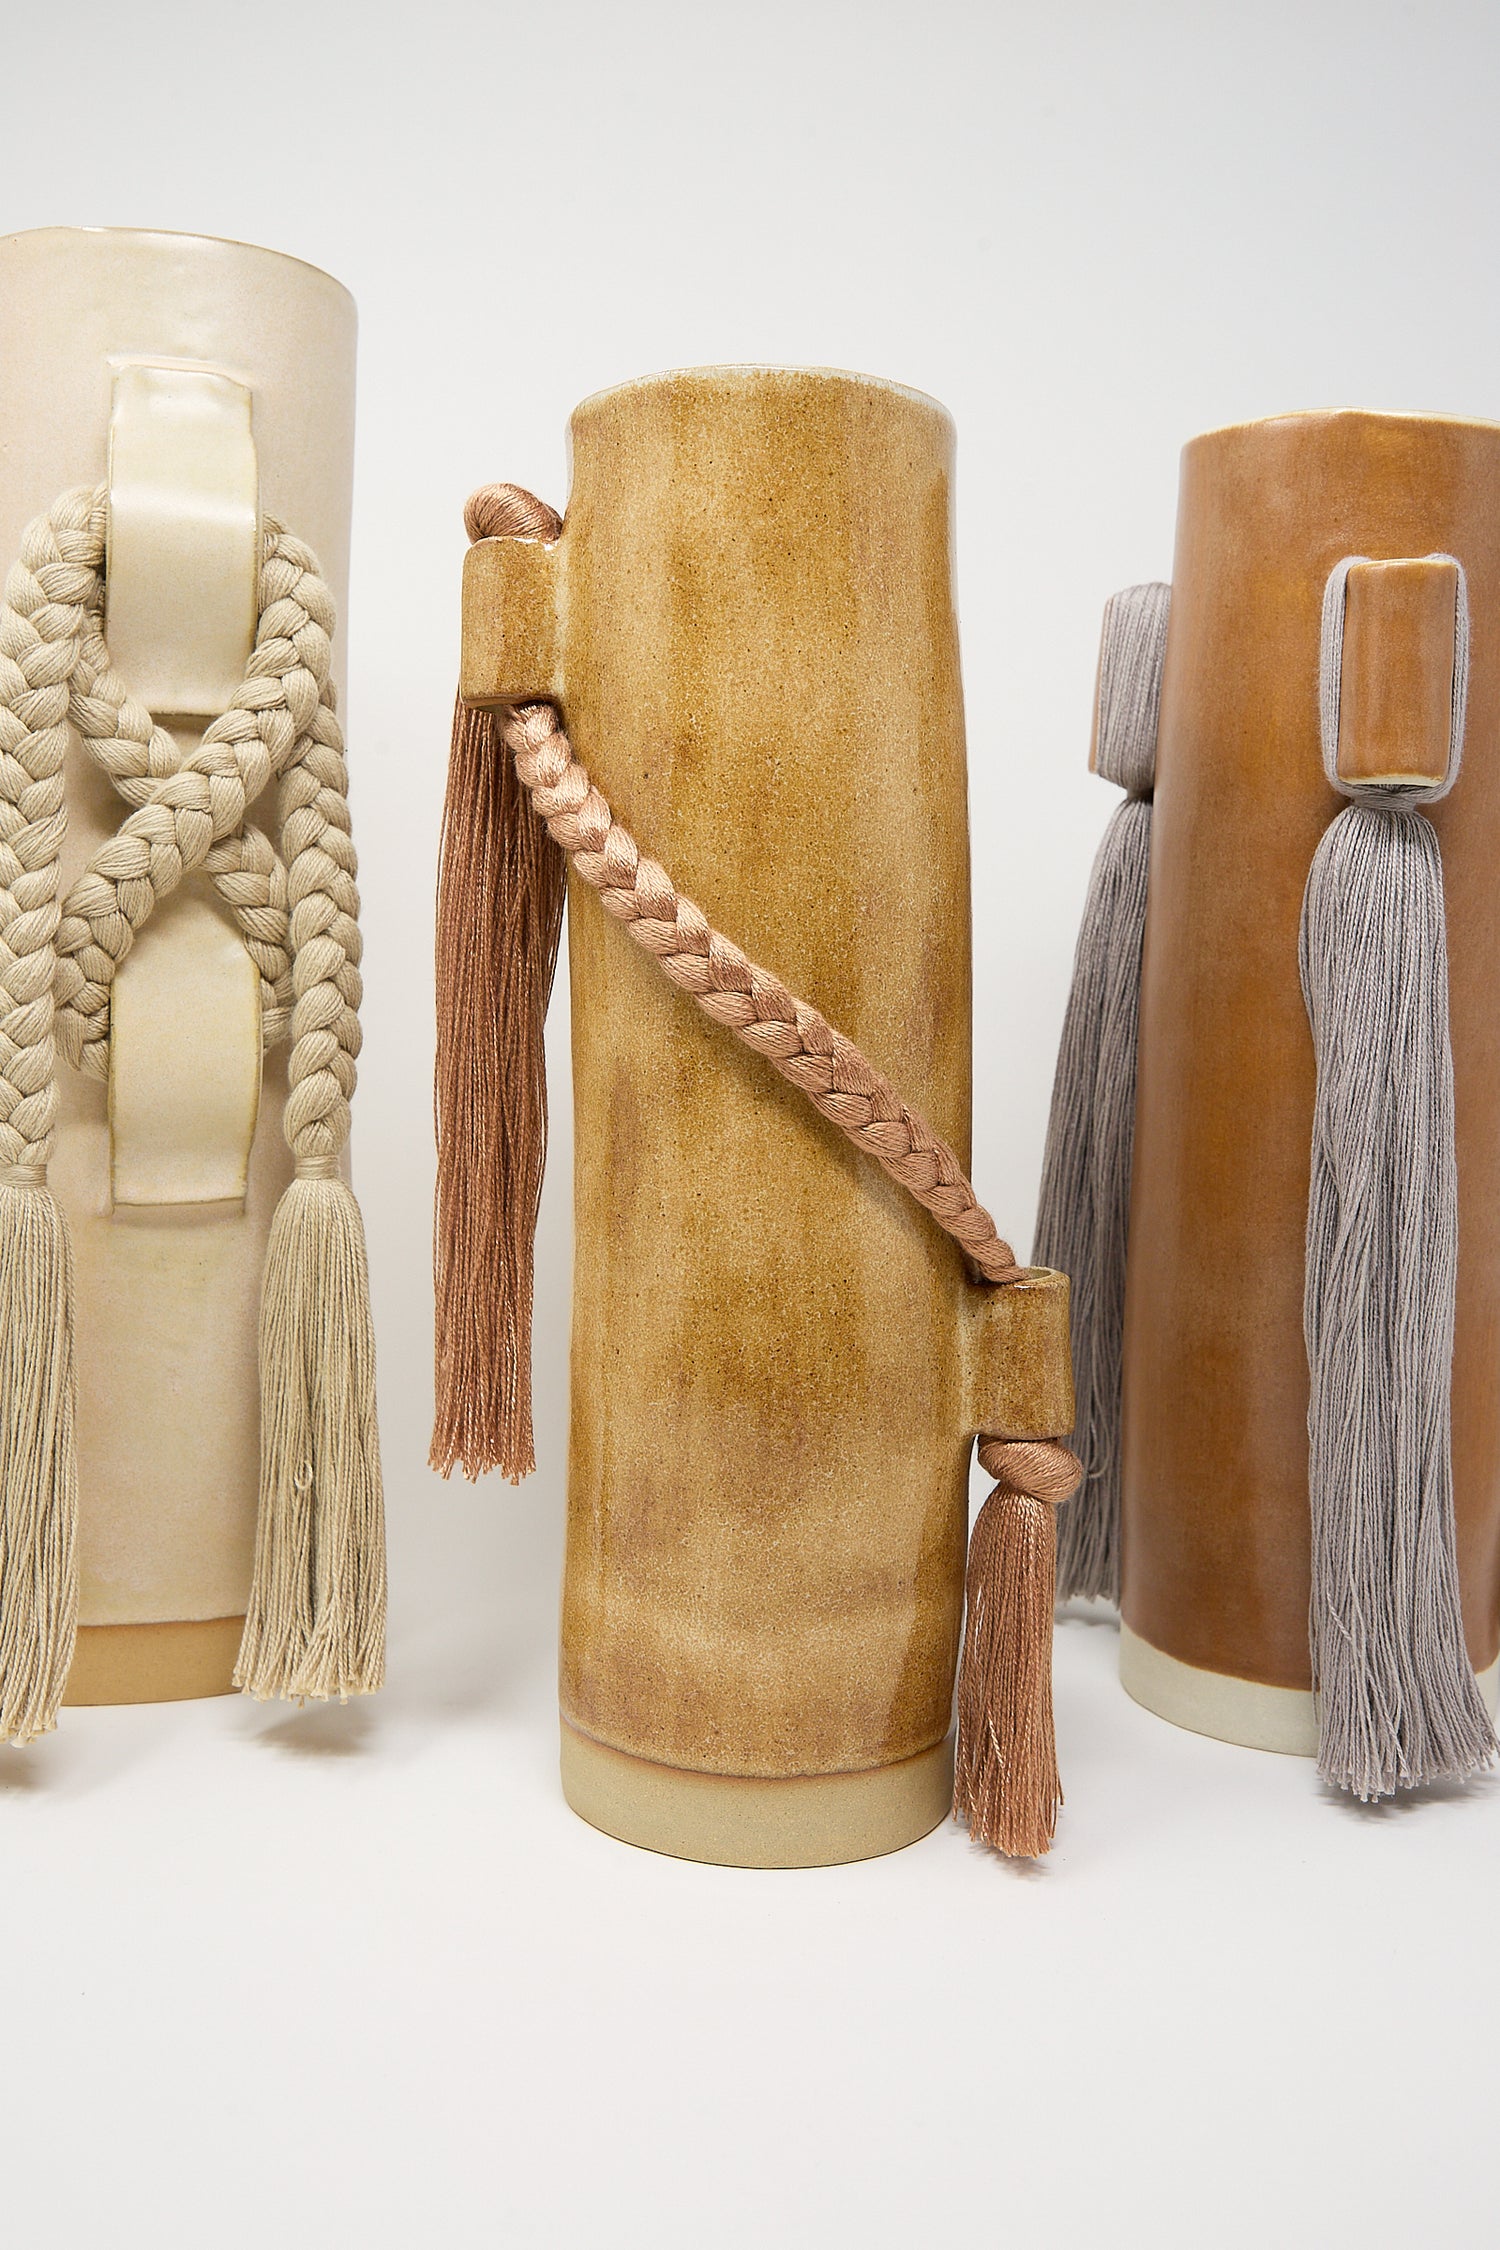 Three cylindrical leather containers with decorative tassels and braided details on a white background are displayed beside a Karen Tinney Vase #695 in Blue.